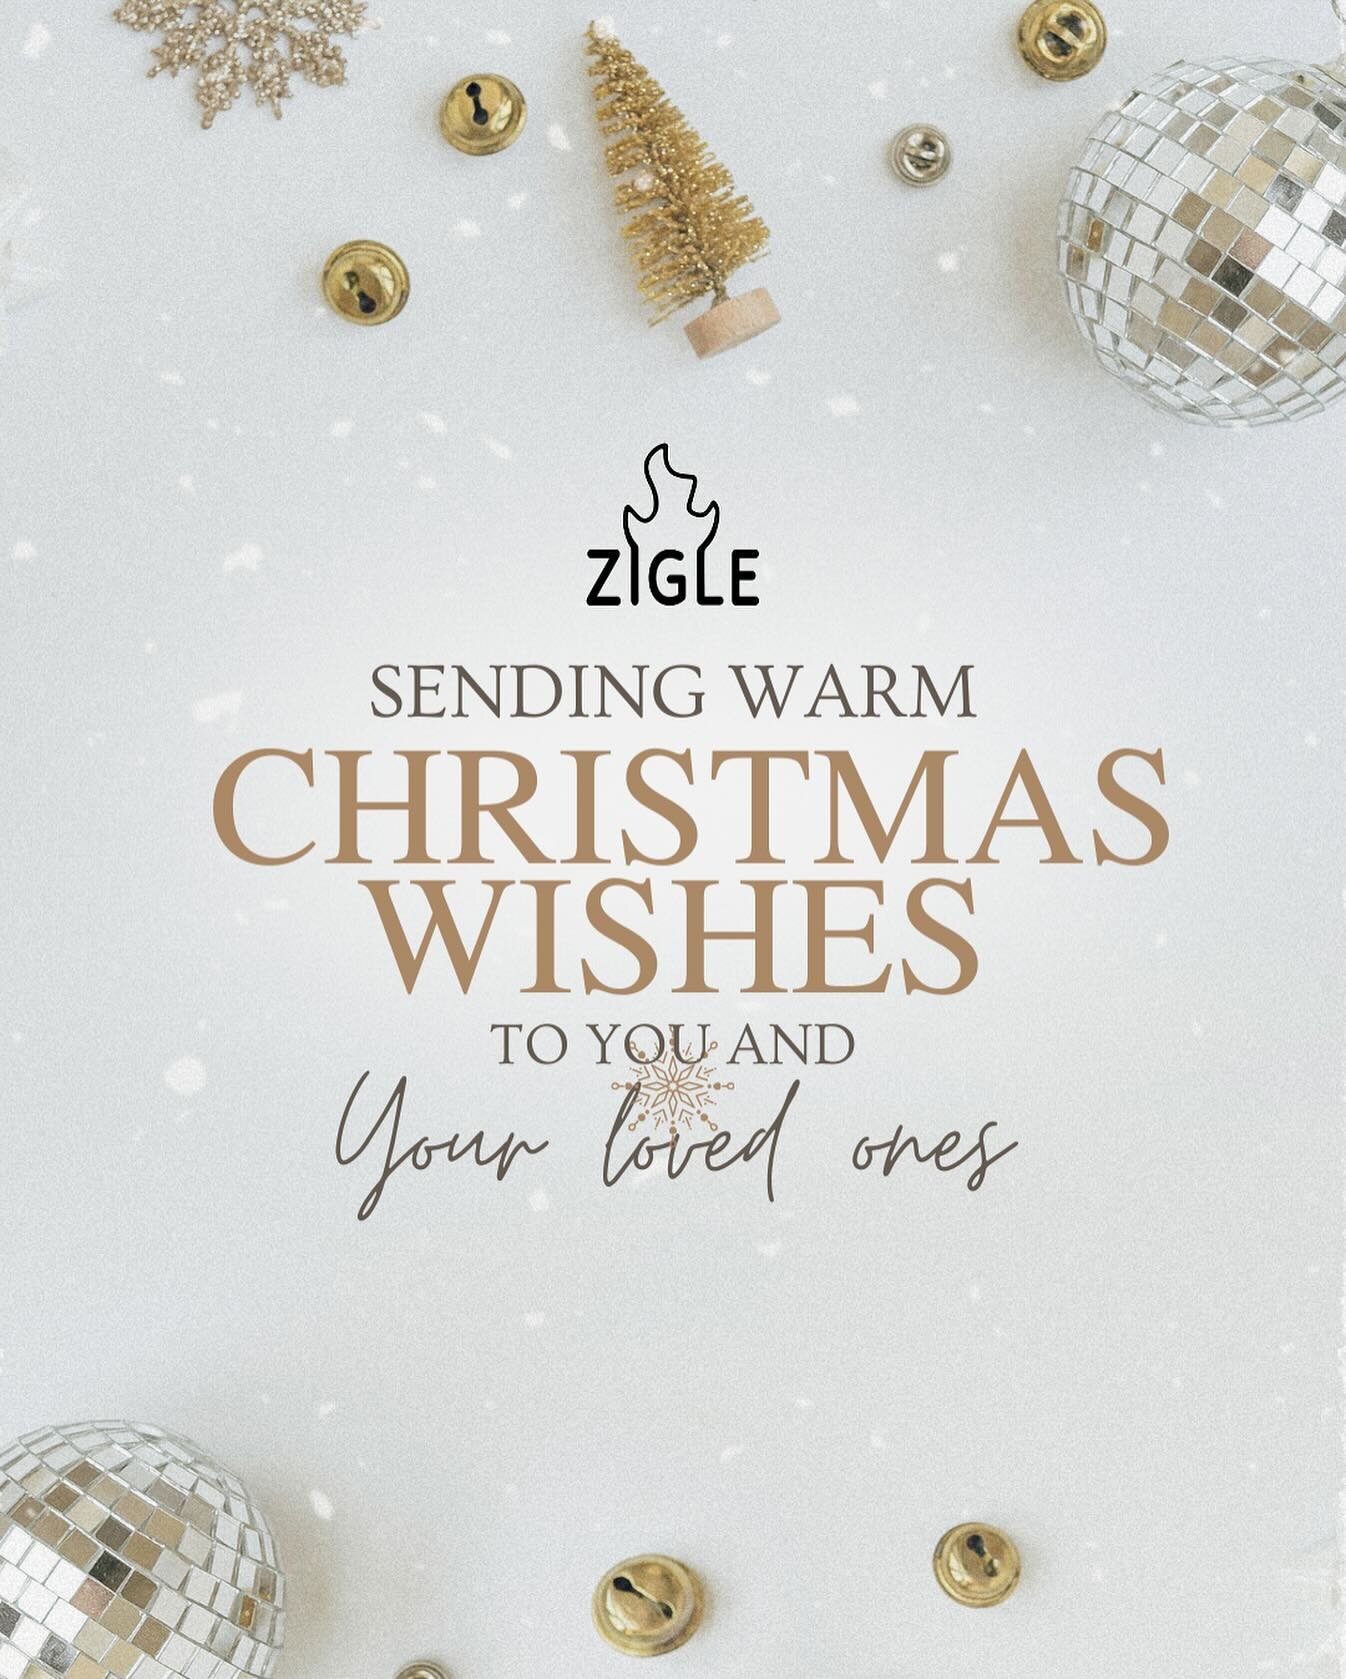 Embracing the magic of the season! Happy holidays to you and yours from all of us at ZIGLE. May this festive time be filled with joy, unity, and delightful moments. 🎄🕊️ #HappyHolidays #merrychristmas